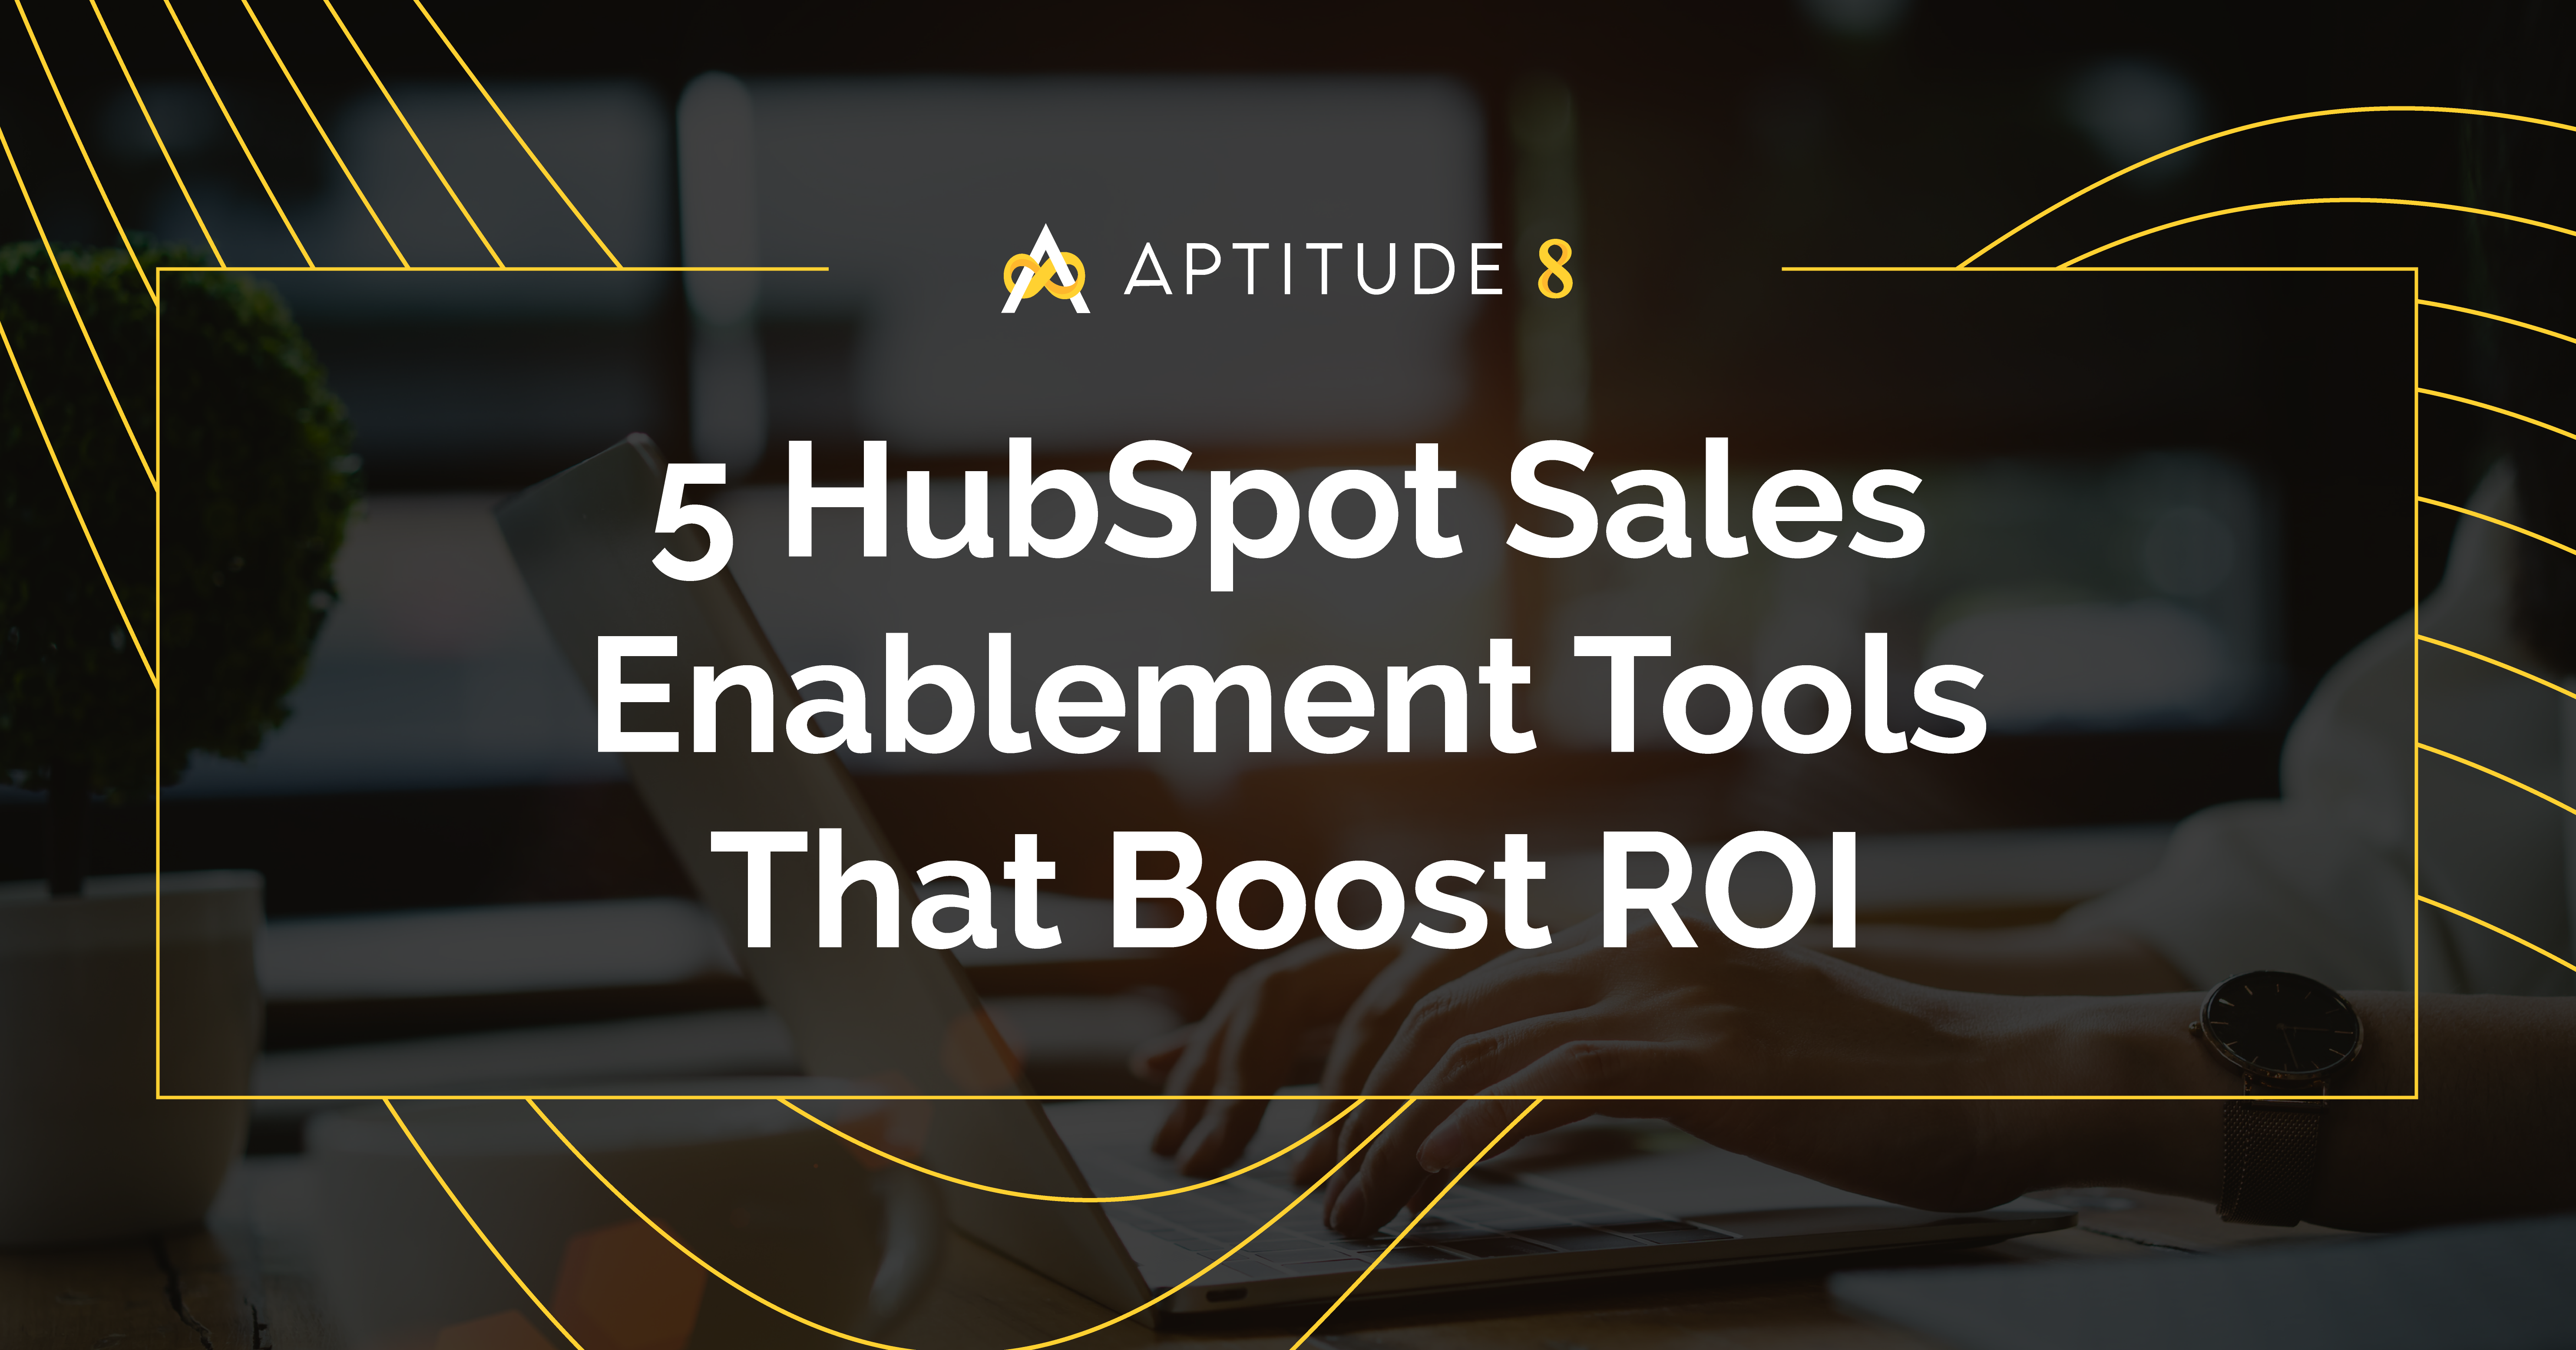 5 HubSpot Sales Enablement Tools That Boost ROI